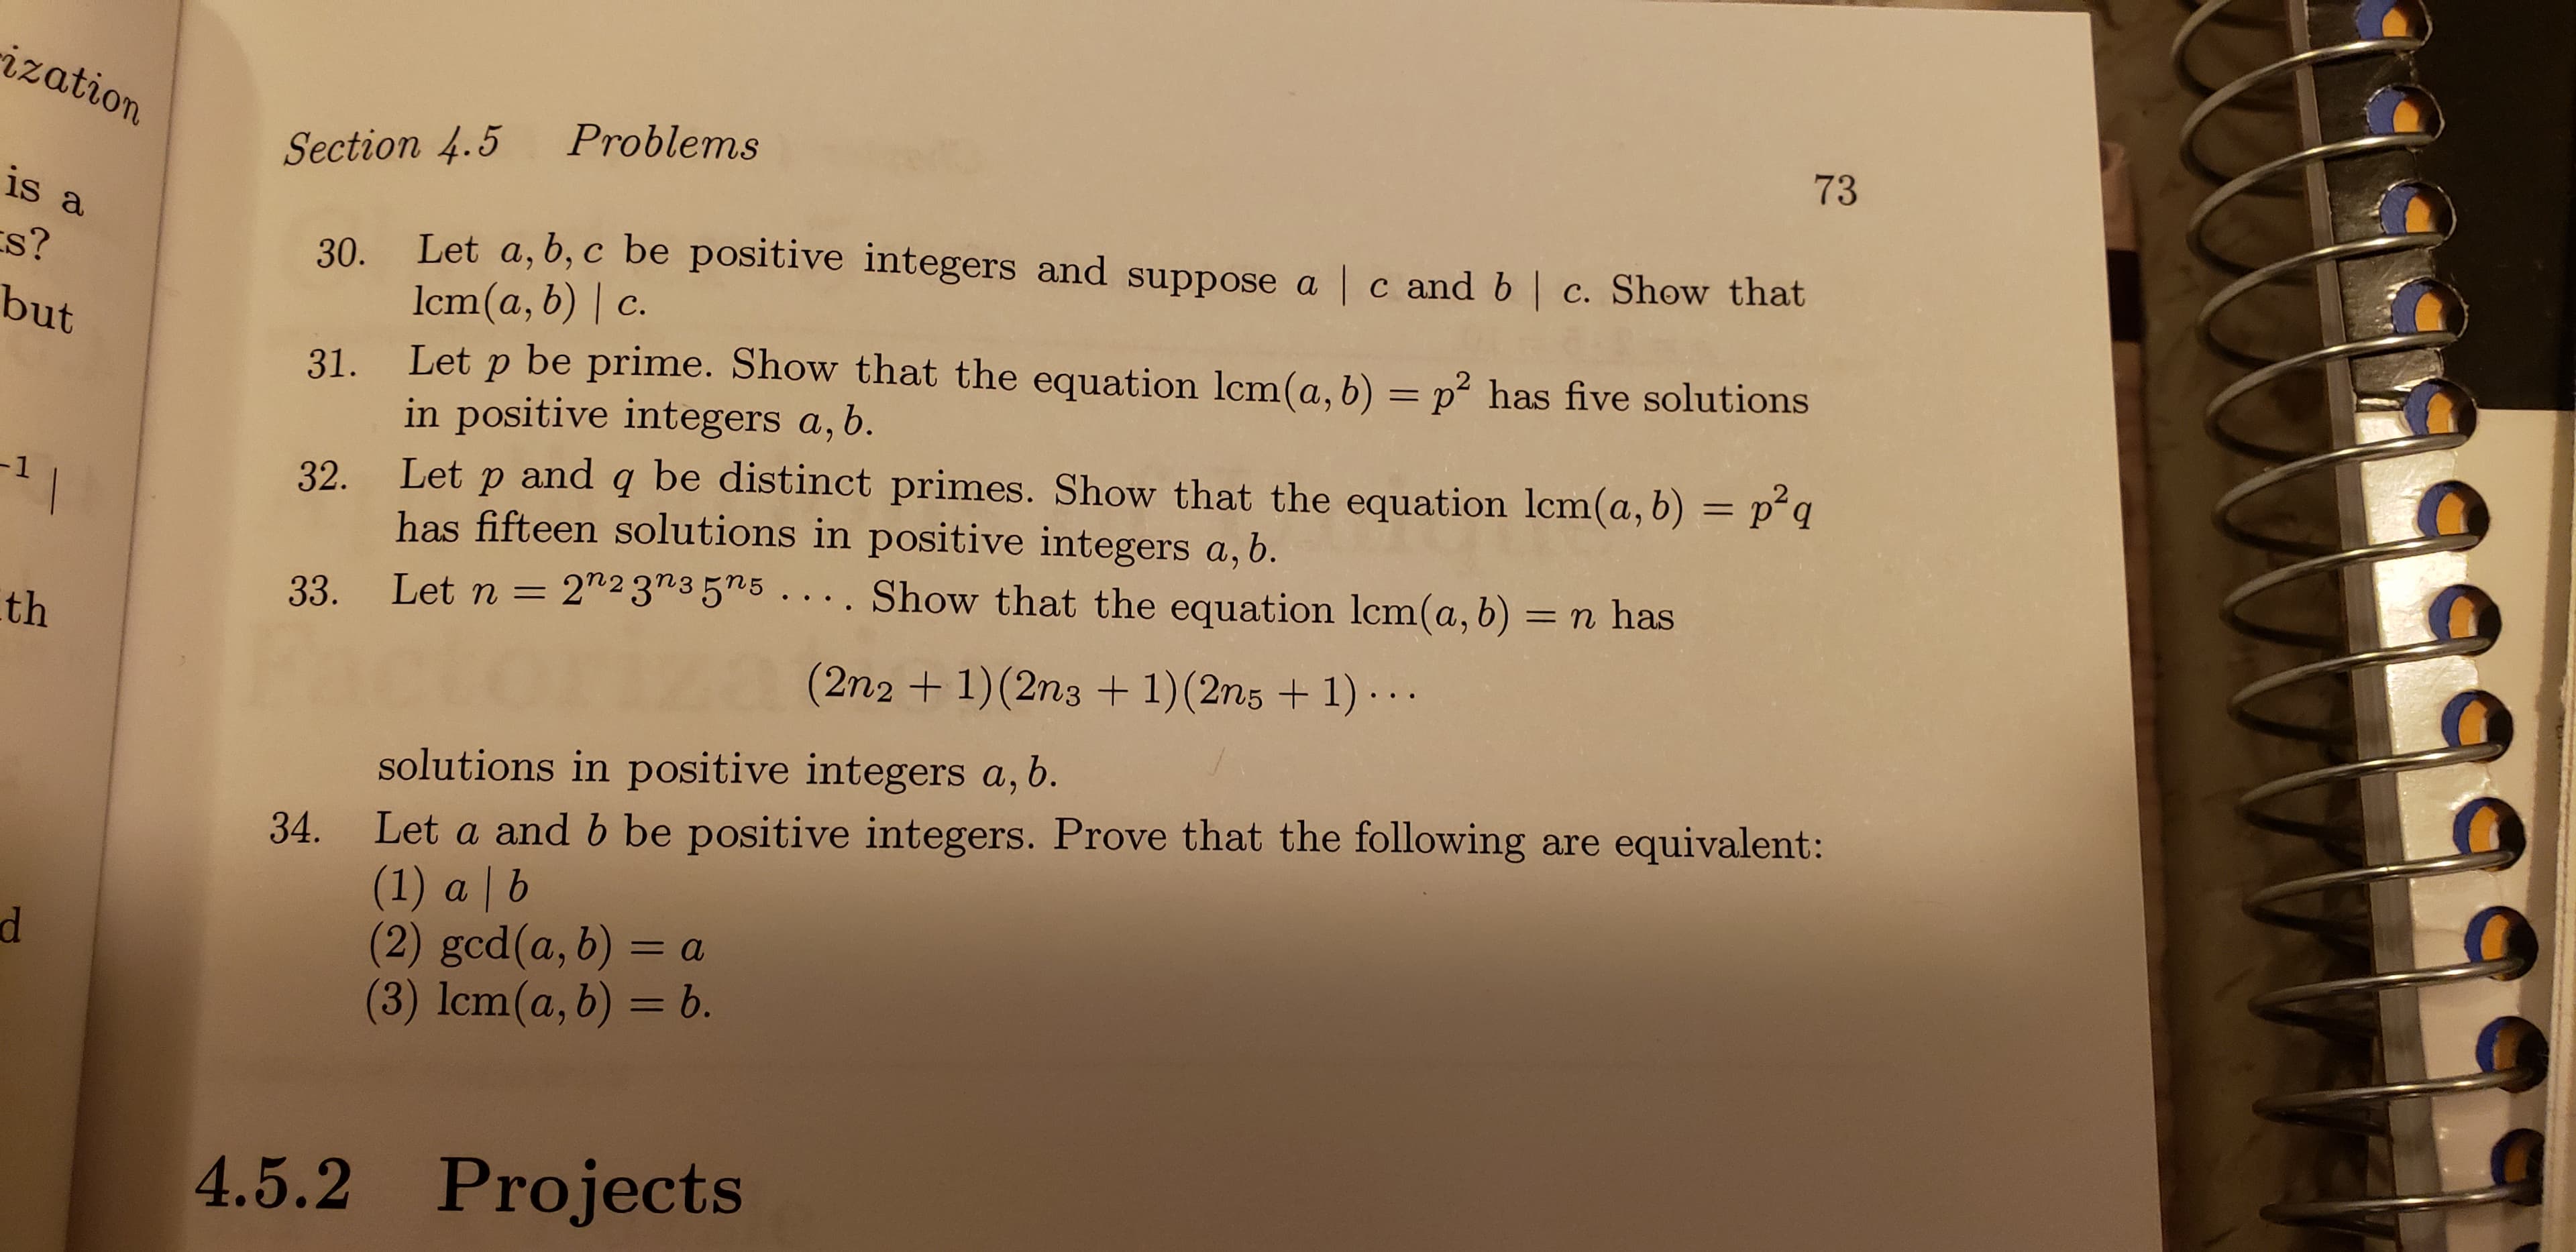 zati
Section 4.5 Problems
73
is
s?
bu
30. Let a, b, c be positive integers and suppose a | c and b | c. Show that
31, Let p be prime. Show that the equation lcm(a, b) 2 has five solutions
32. Let p and q be distinct primes. Show that the equation lcm(a, b) = p2q
33. Let n = 2n23"35n5 . . . . Show that the equation lcm(a, b)-n has
lcm(a, b) | d.
in positive integers a, b.
has fifteen solutions in positive integers a, b.
th
(2n2 + 1)(2ns + 1)(2ns + 1)..
solutions in positive integers a, b
Let a and b be positive integers. Prove that the following are equivalent:
(1) a b
(2) ged(a, b)-a
(3) 1cm(a, b) = b.
34.
4.5.2 Projects
